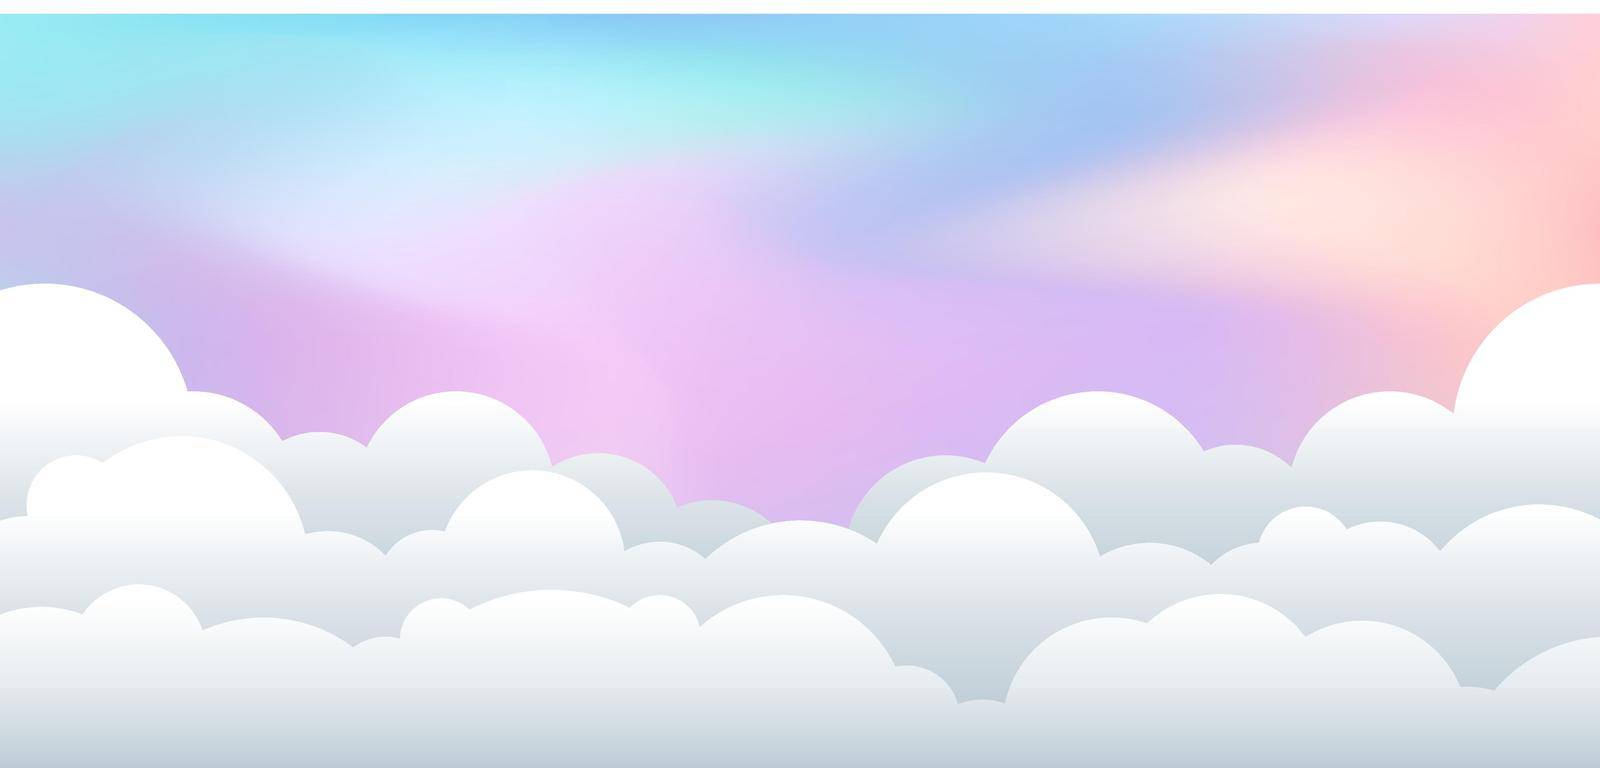 Landscape with cloudy paper cut Illustration style pastel background by rarinlada